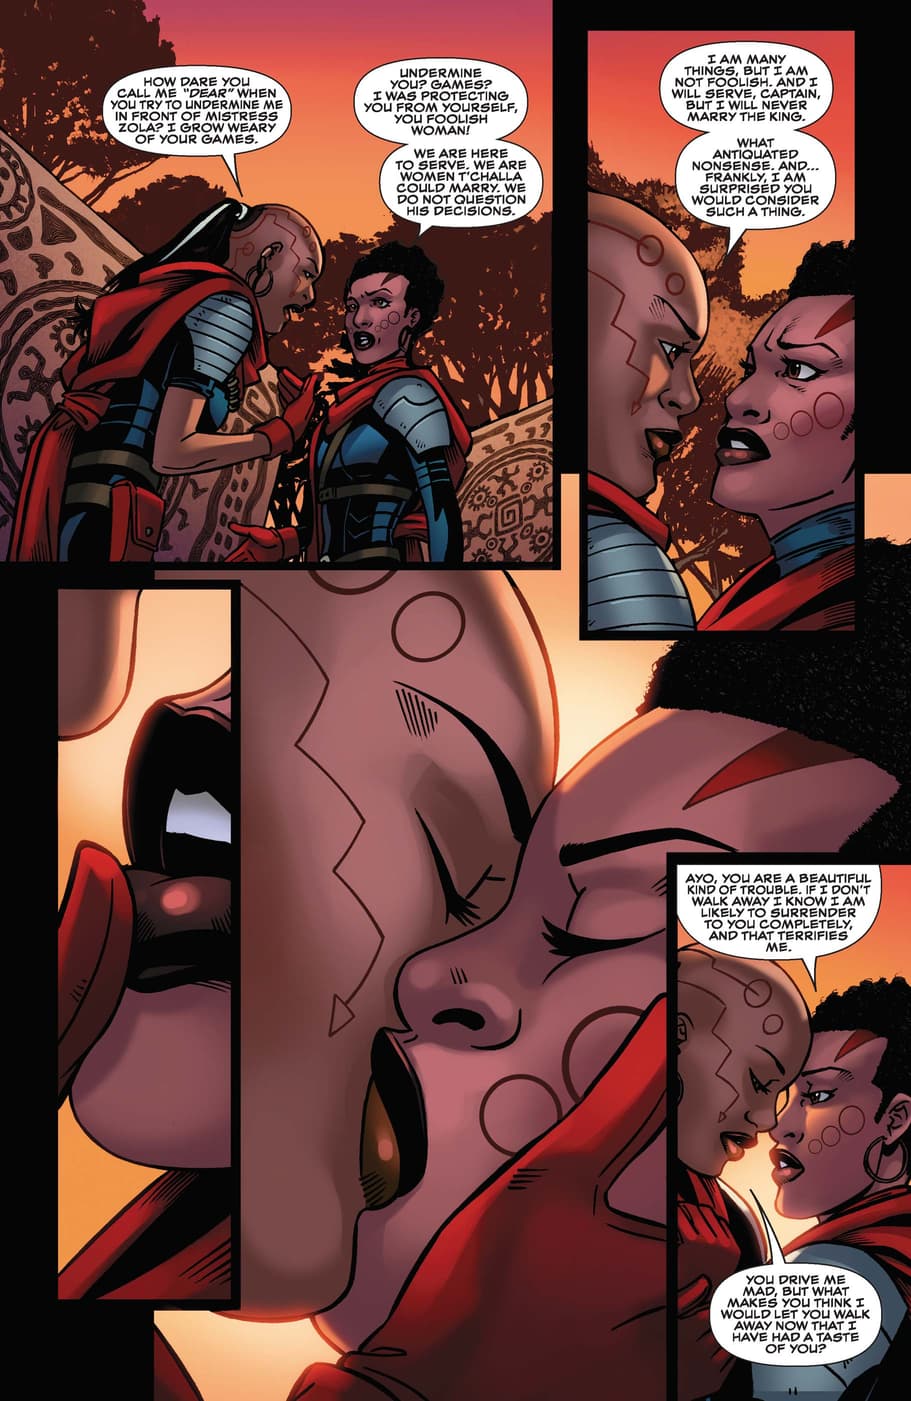 A first kiss in BLACK PANTHER